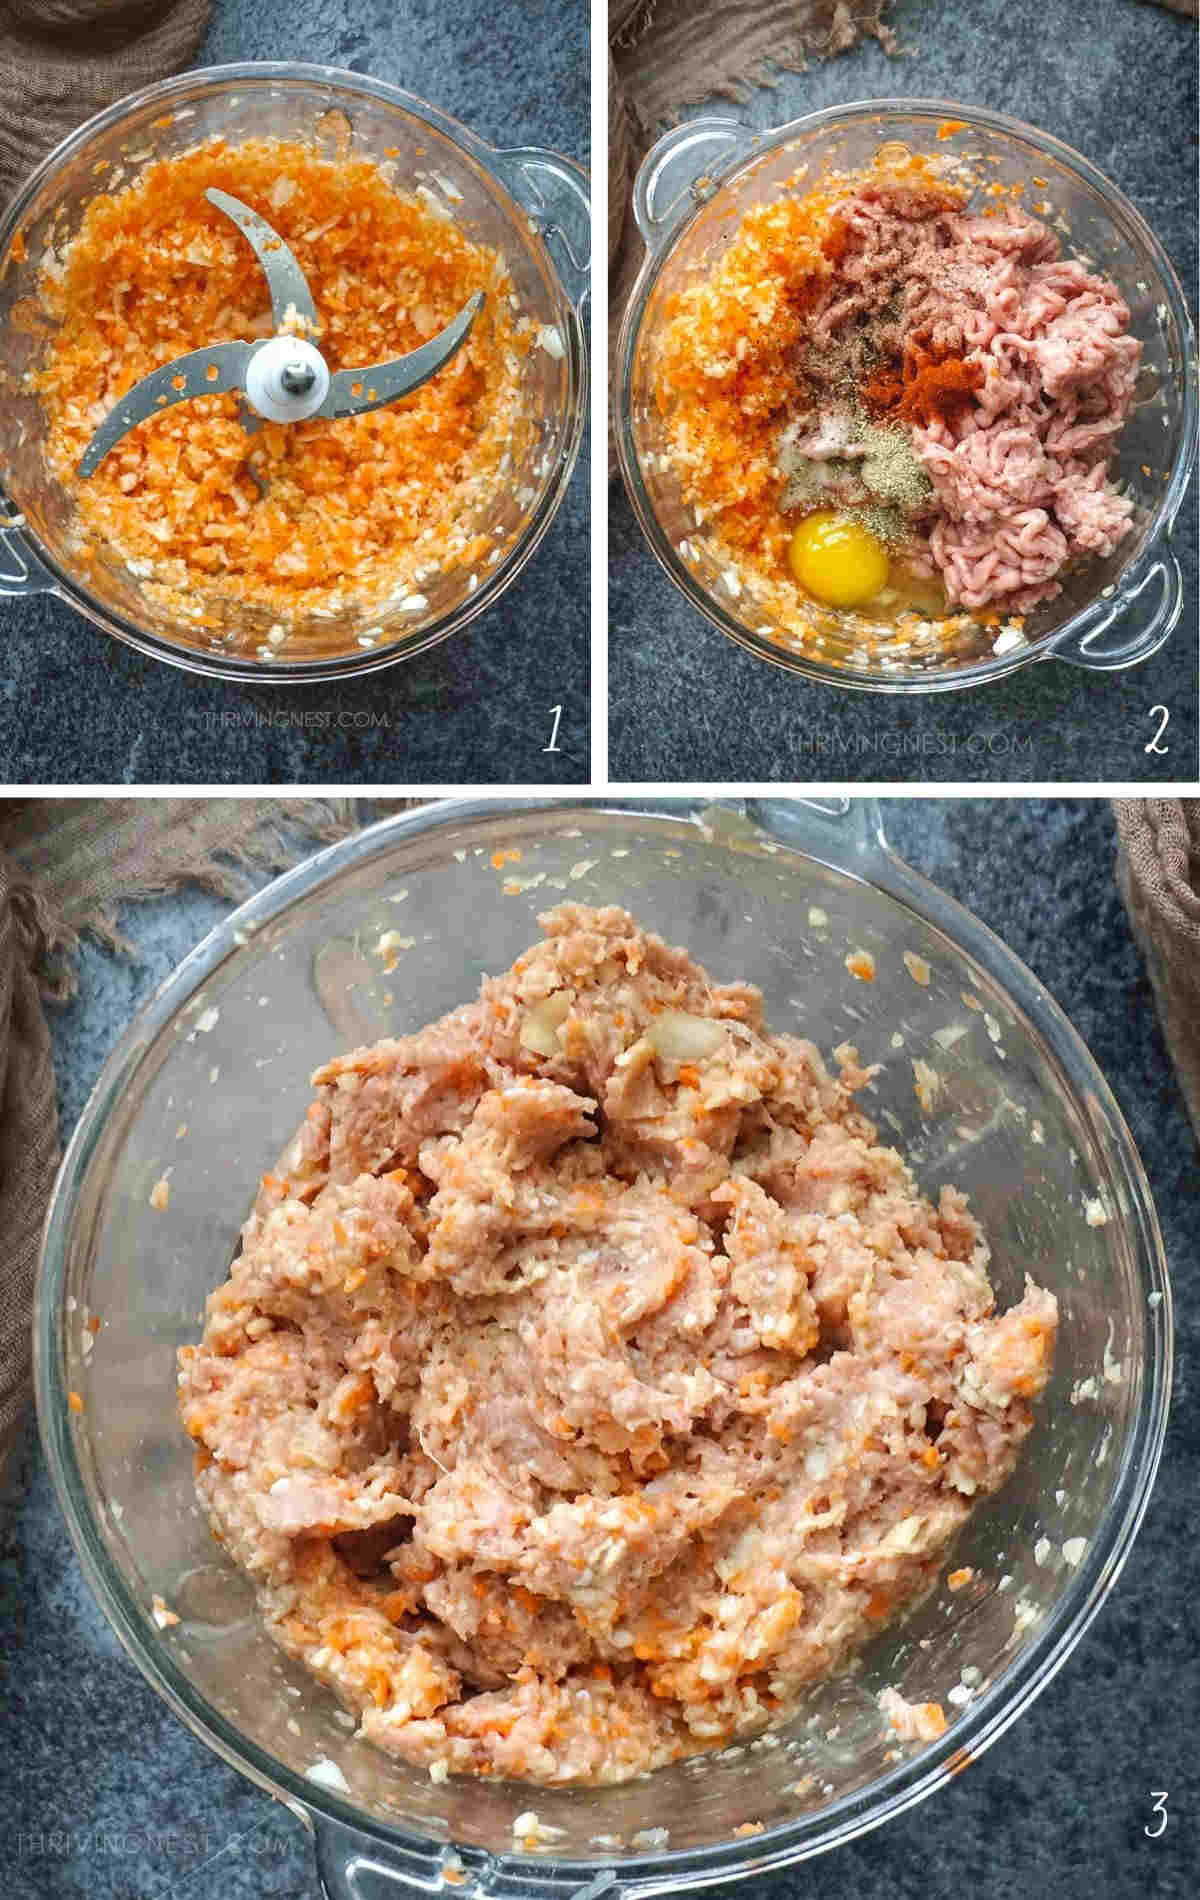 Process shots: combining the ground turkey with veggies, egg and seasoning for baby turkey meatballs.